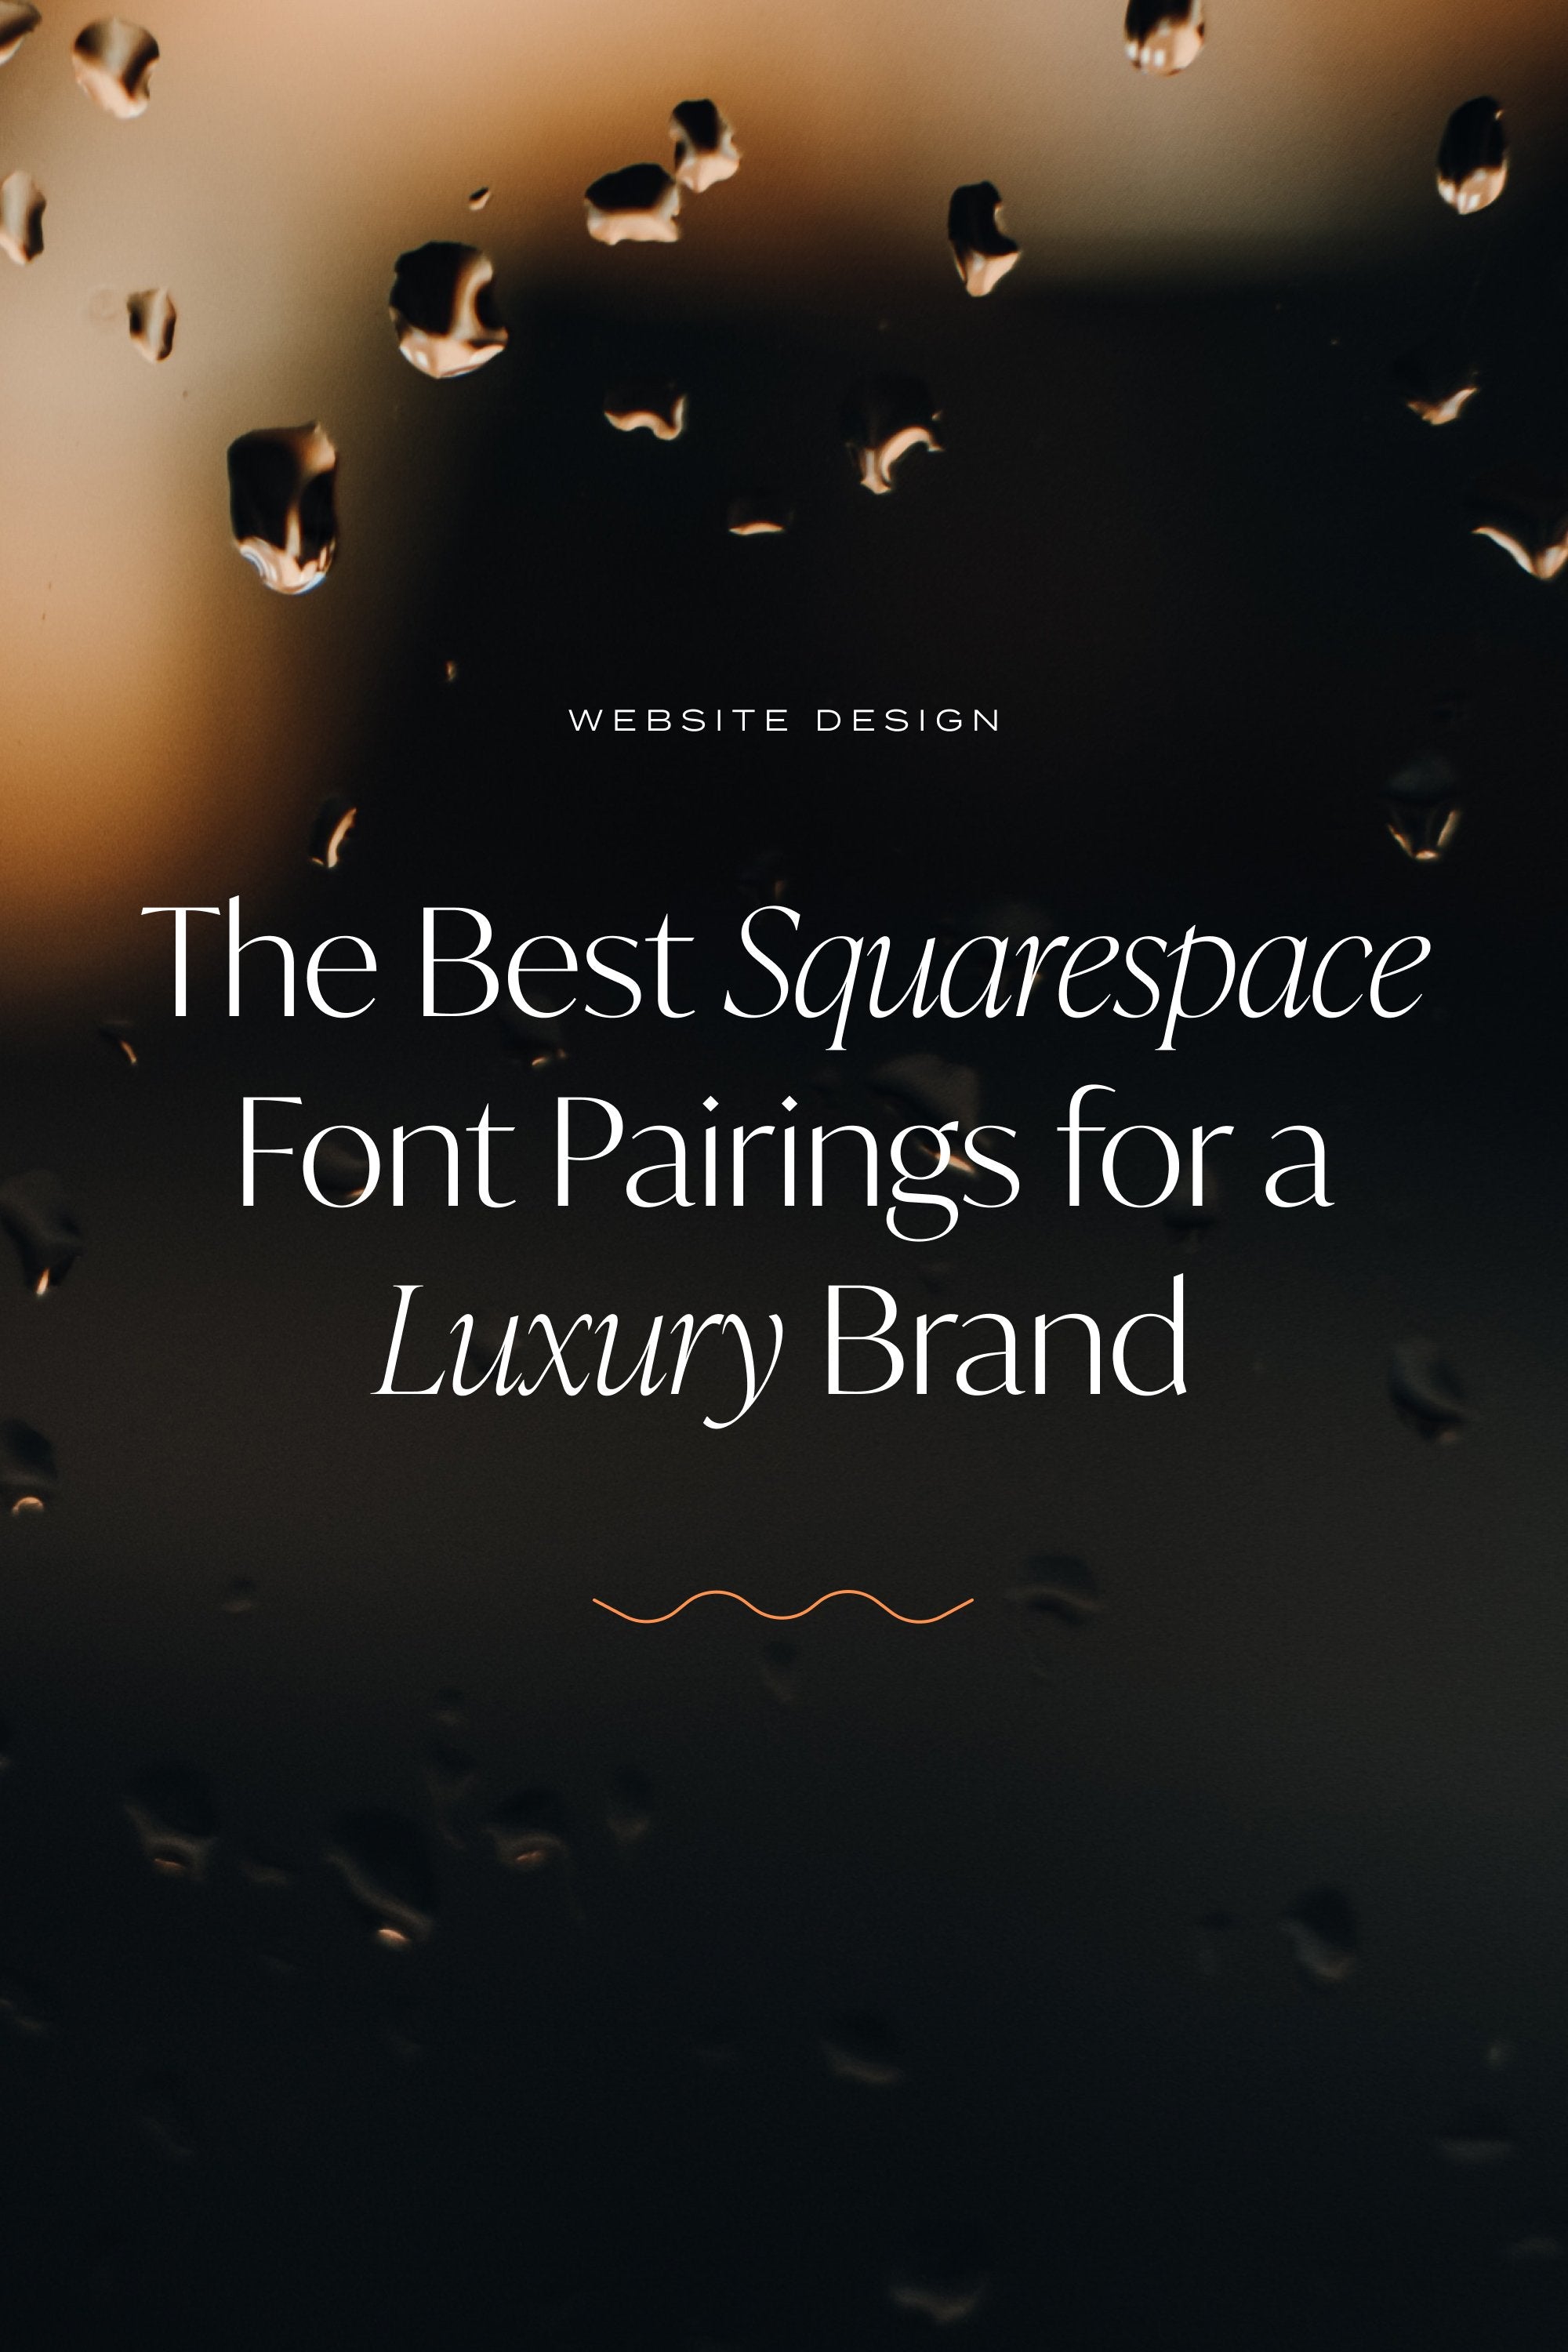 The Best Squarespace Font Pairings For a Luxury Brand | Squarebase Squarespace Font Pairings 